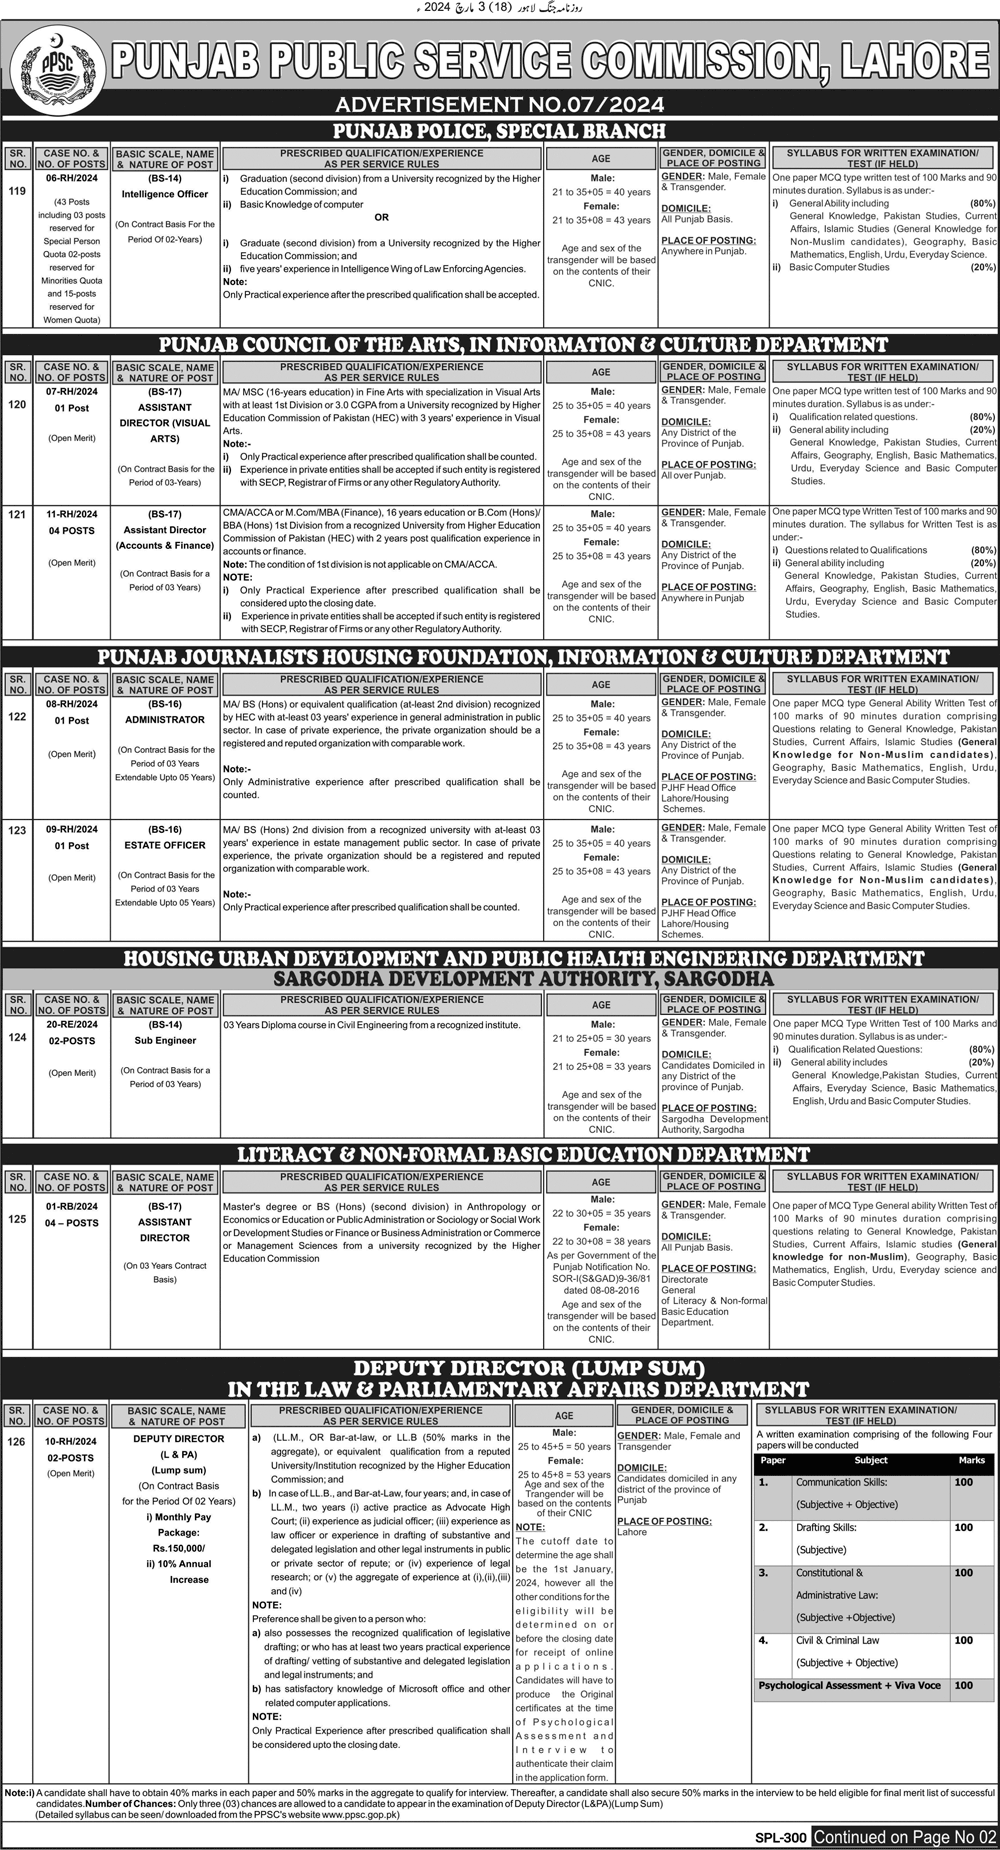 BPS-14 to BPS-20 PPSC Vacancies Ad No. 07 for 2024